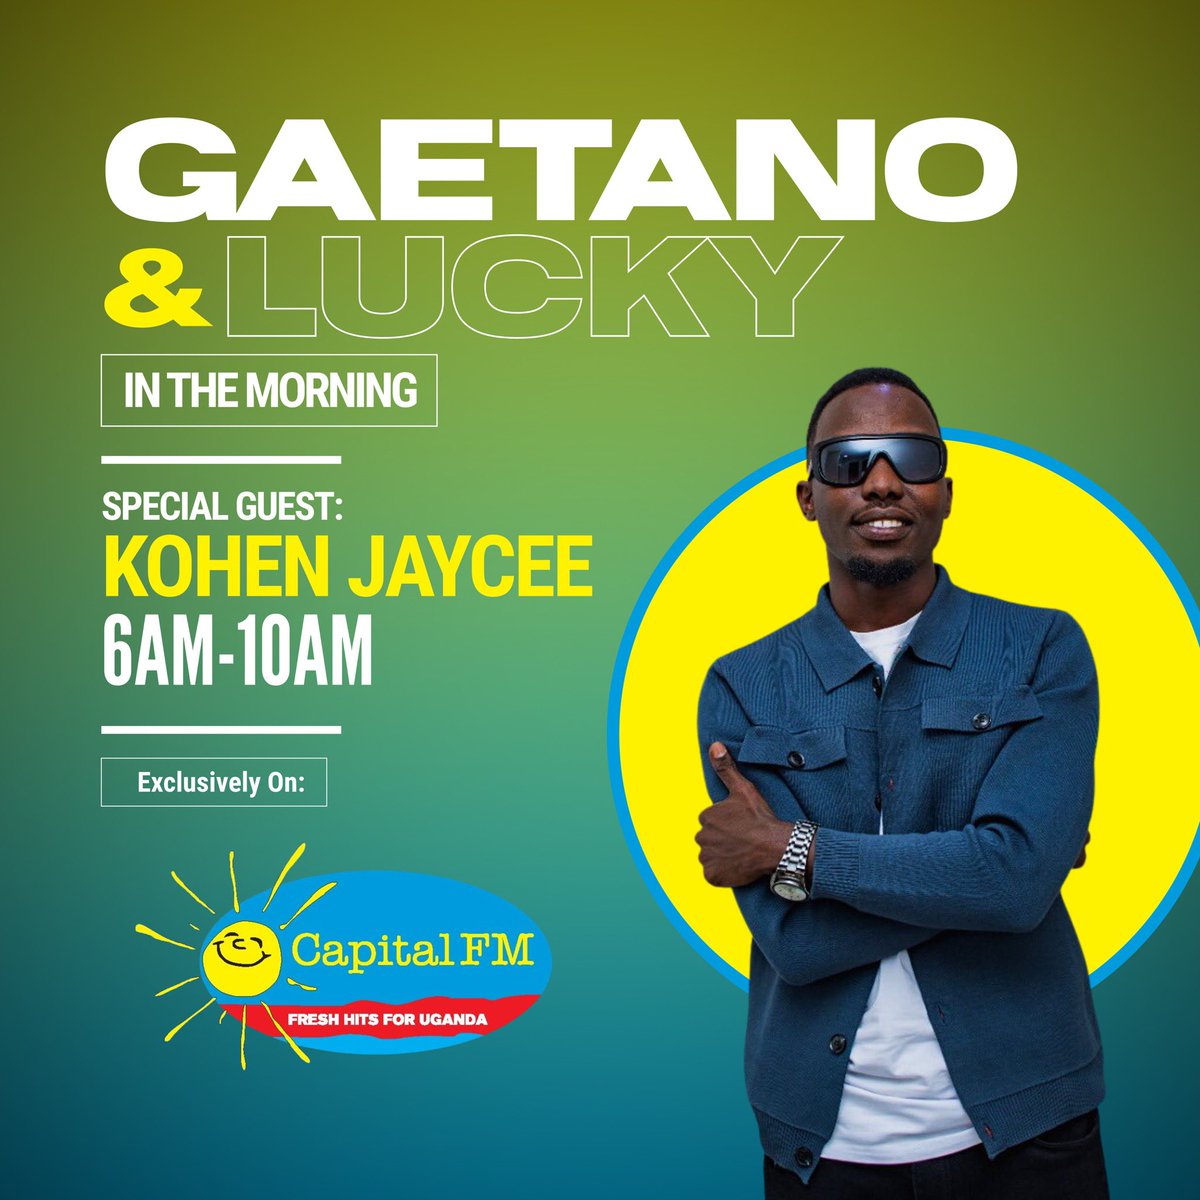 Tomorrow I’ll be hanging out with #GaetanoAndLucky In the Morning. Tune in for the exclusive. ❤️